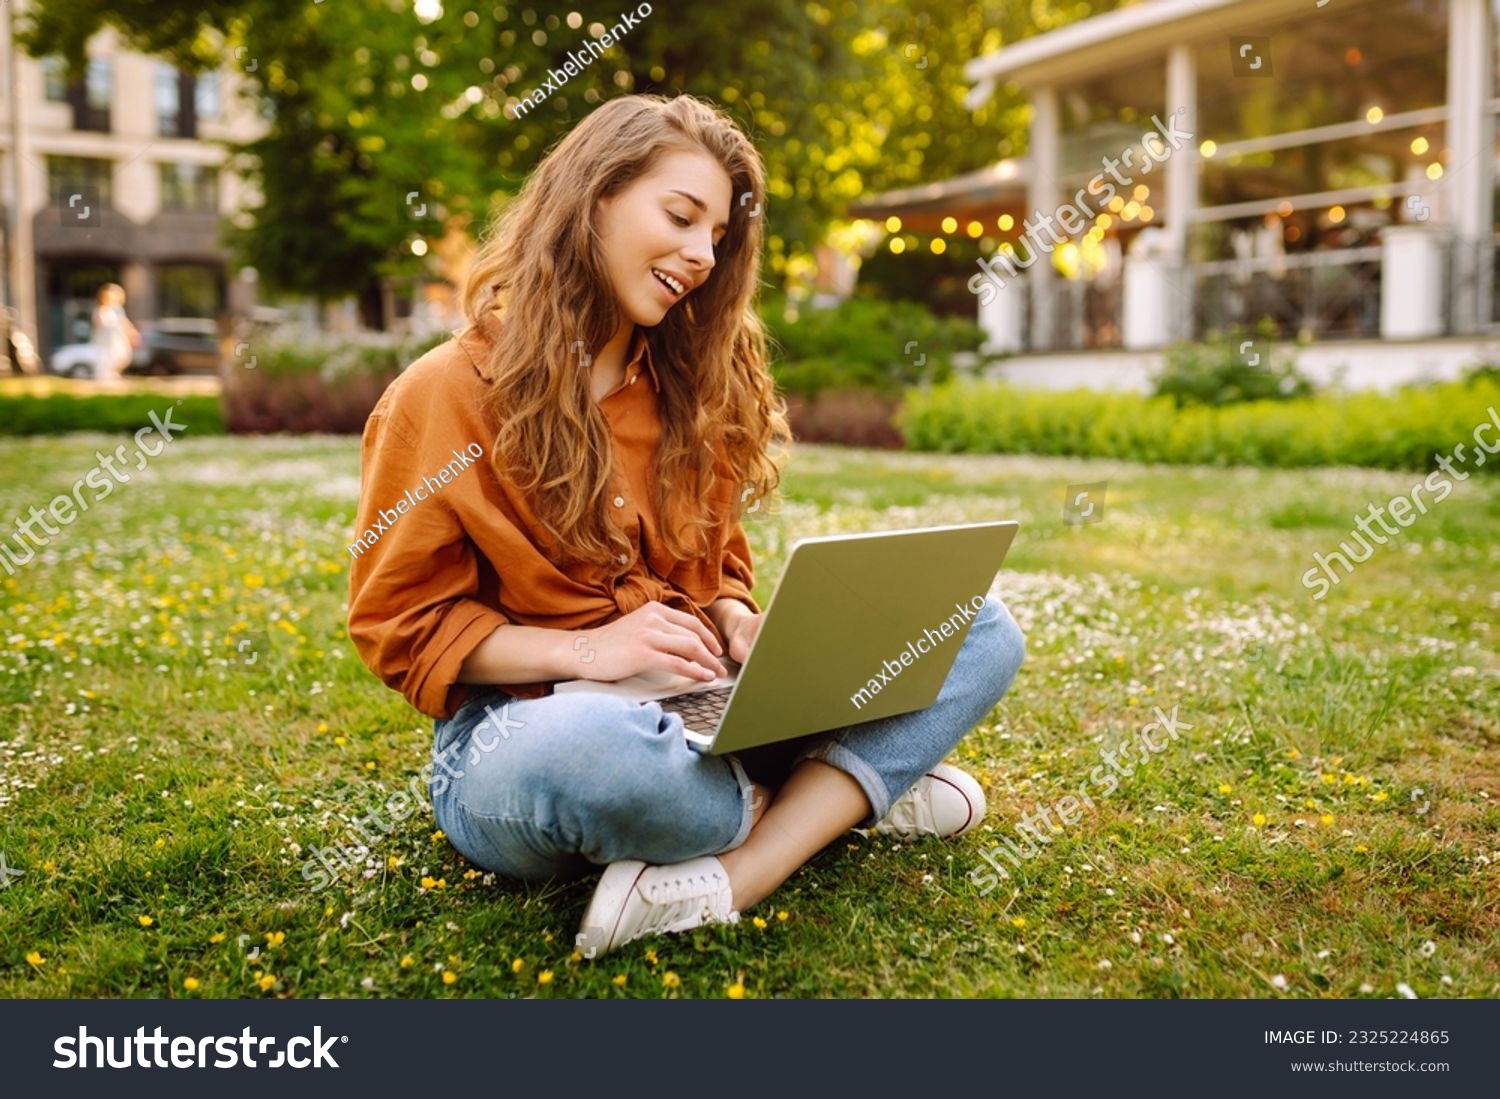 Smiling young woman with a laptop working or studying online outdoor. Concept for education, business, blog or freelance. #2325224865